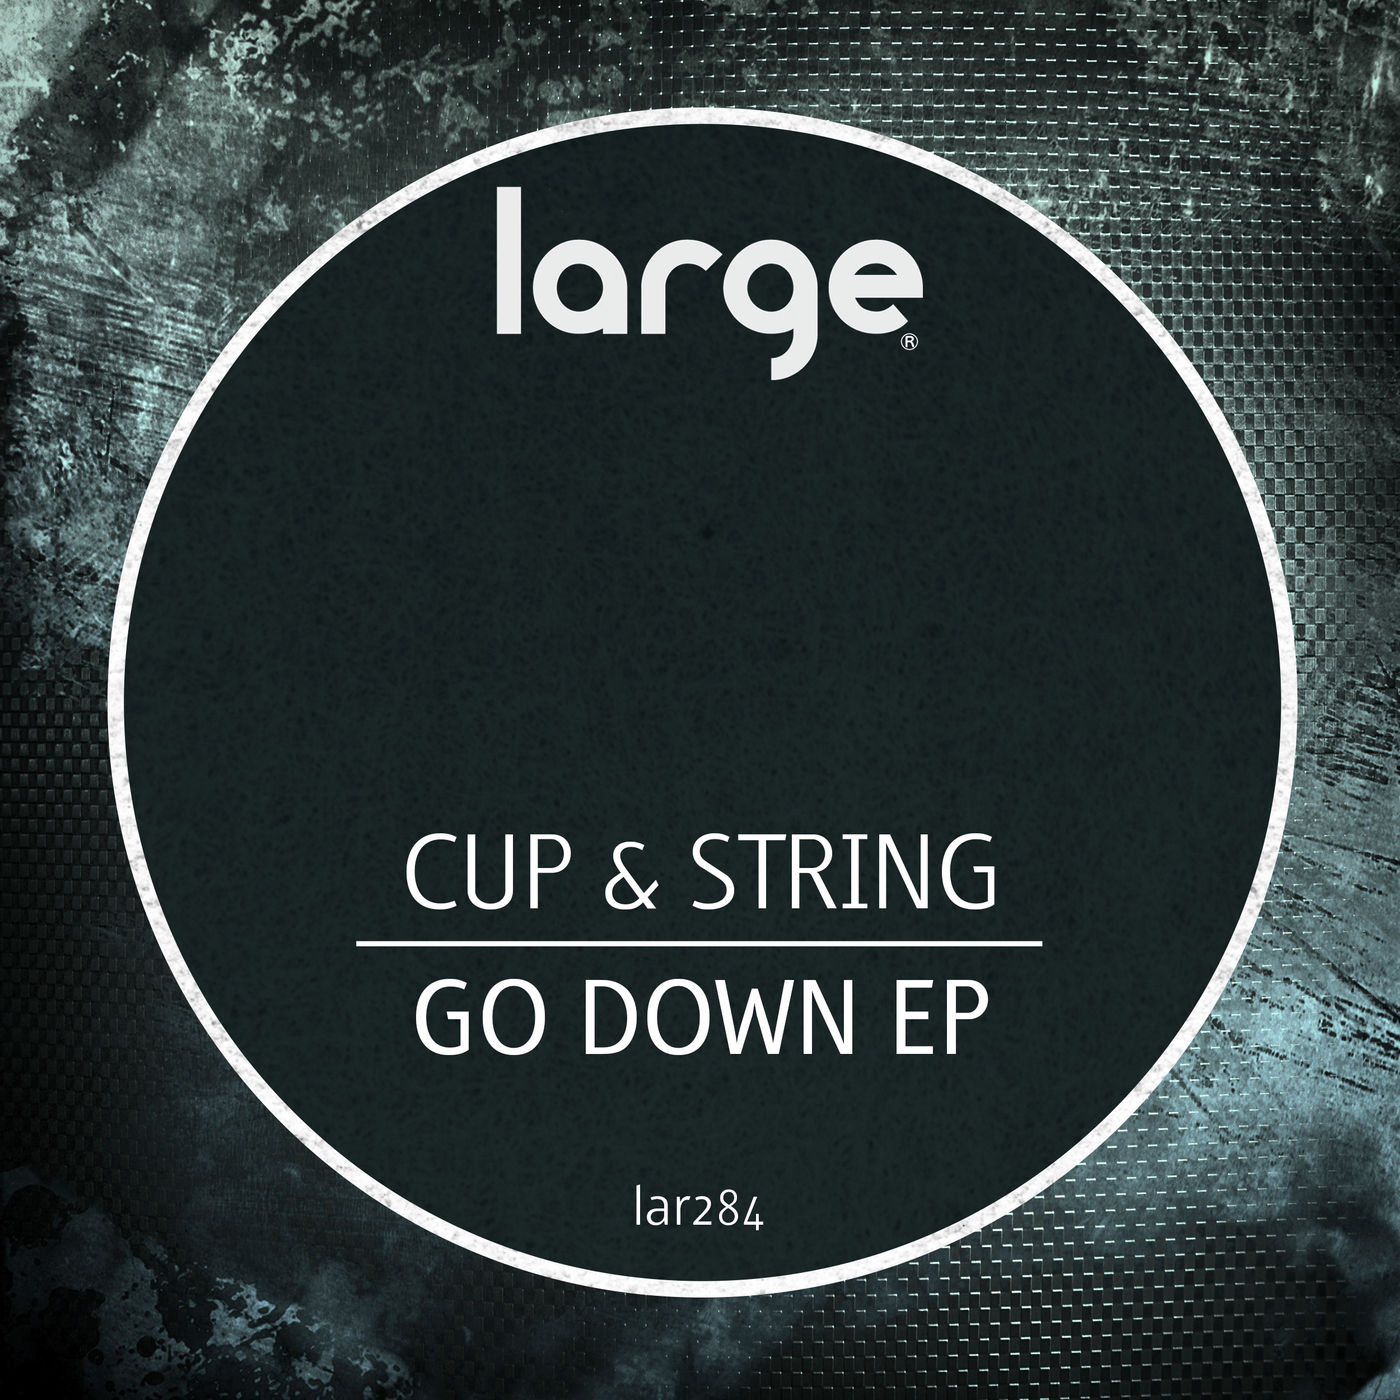 Cup & String - Go Down EP / Large Music